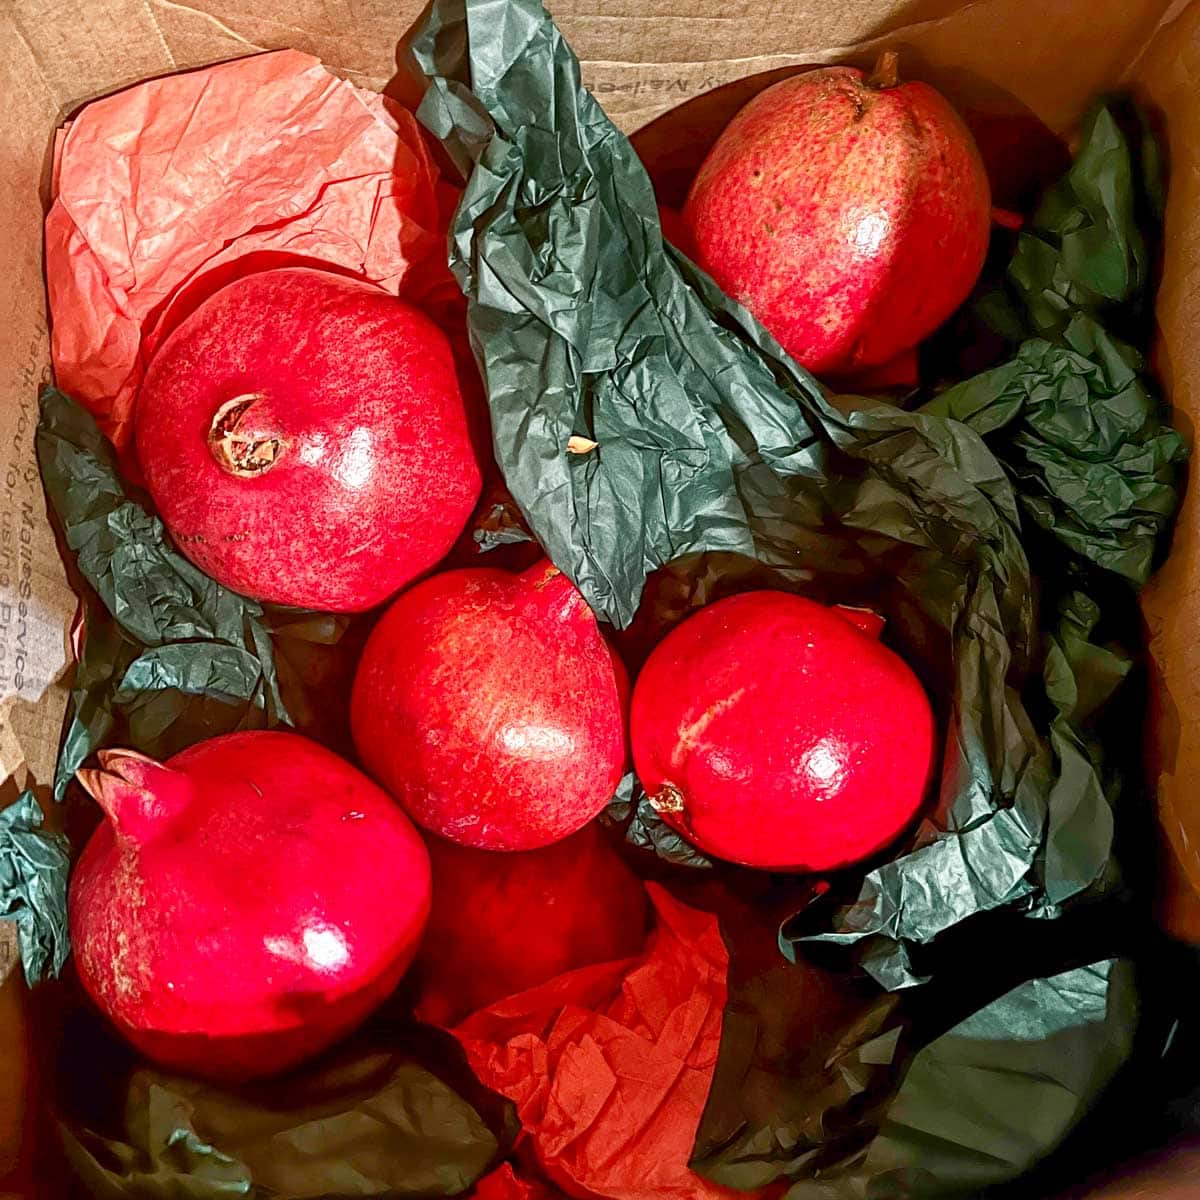 pomegranates in a box with green tissues around them